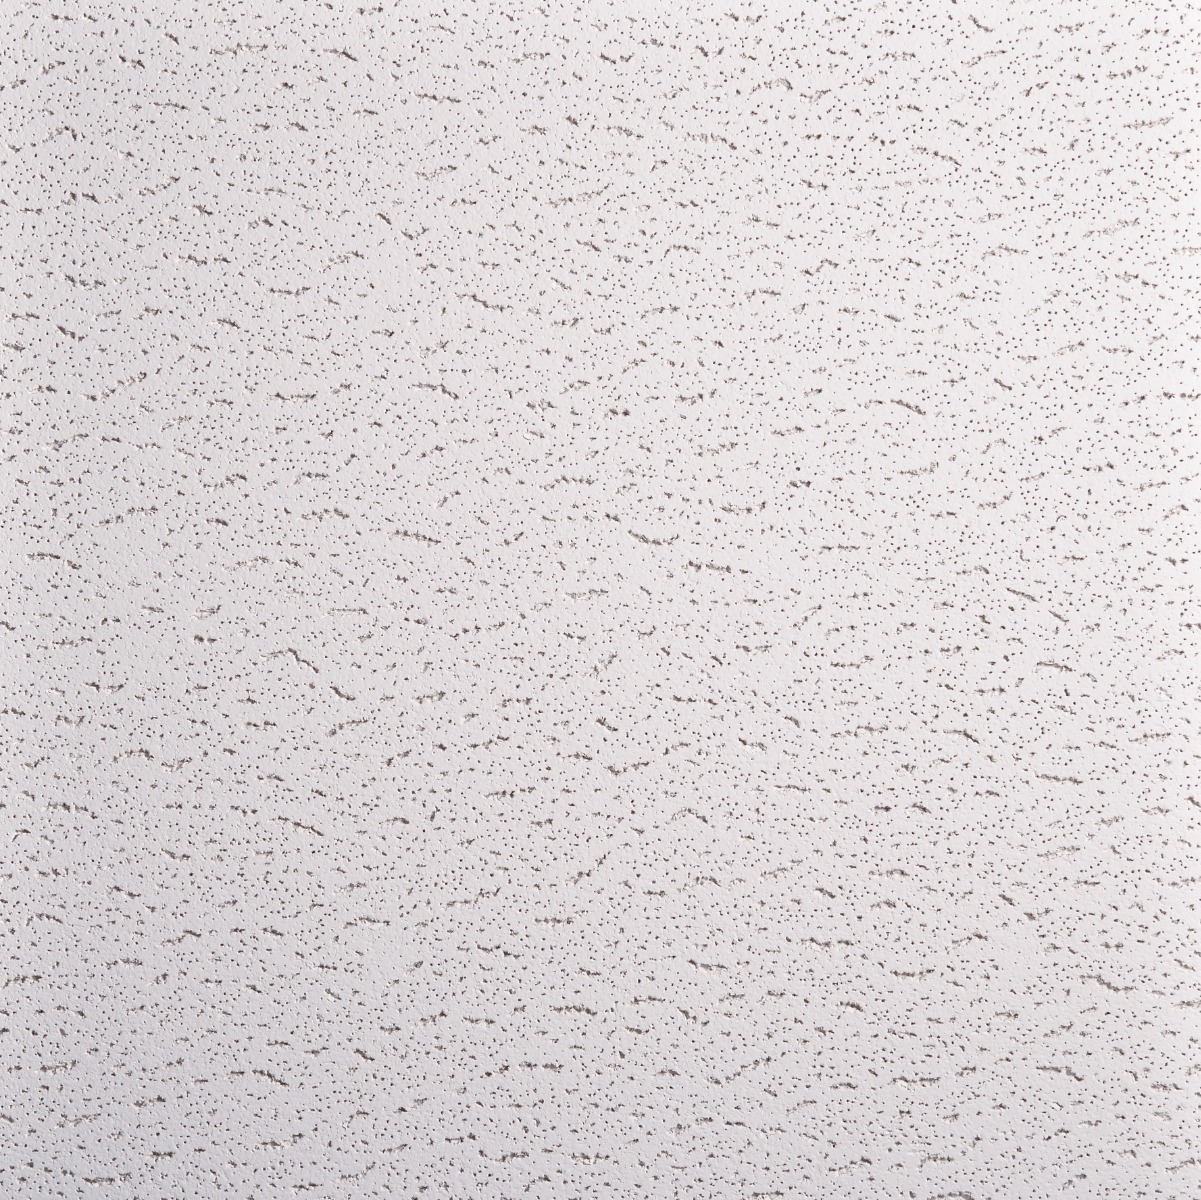 ZENTIA ARMSTRONG TATRA Fission Board 600 x 600mm Square Edge Ceiling Tiles BP958M (Box Qty: 16)